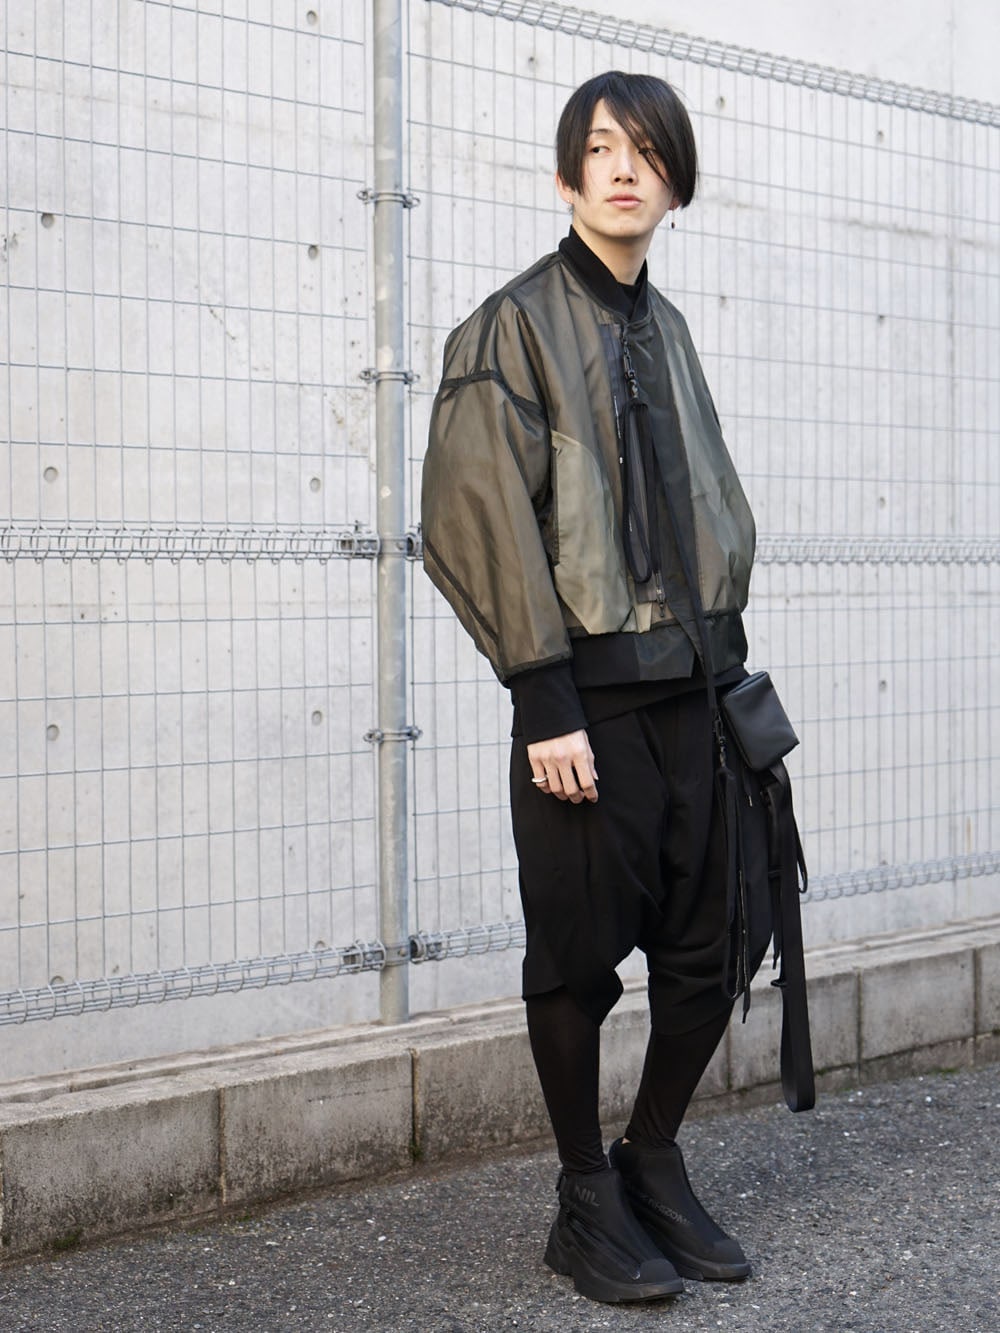 NILøS New graphic See through jacket Styling !! - FASCINATE BLOG